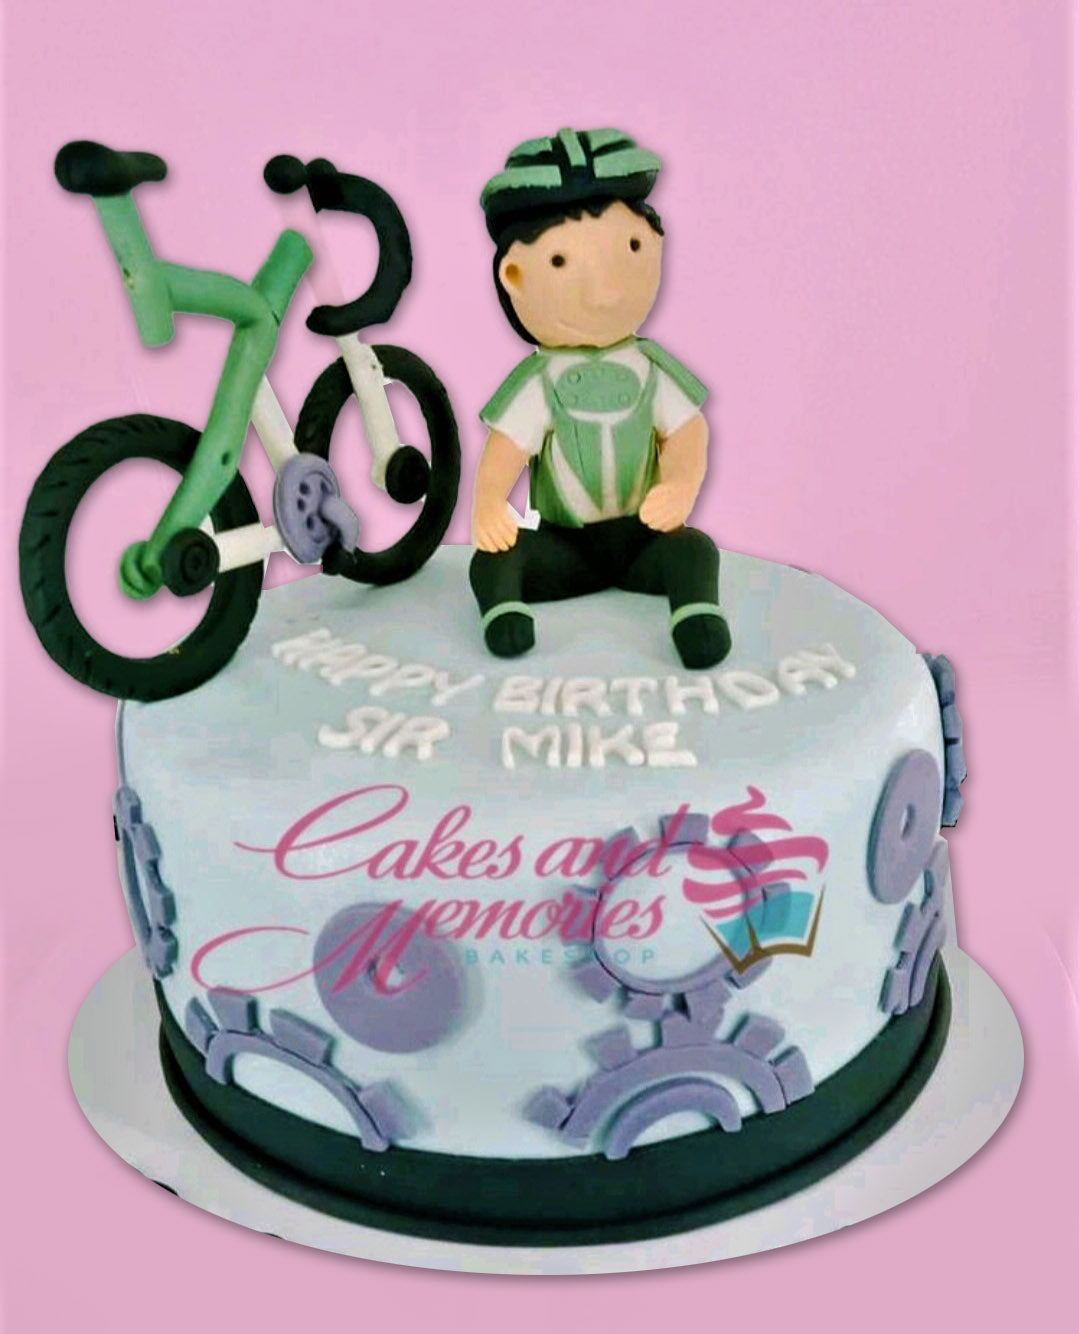 Slope Down Fault Line cake | New Trendy Cake Design | Bicycle Lover Cake -  YouTube